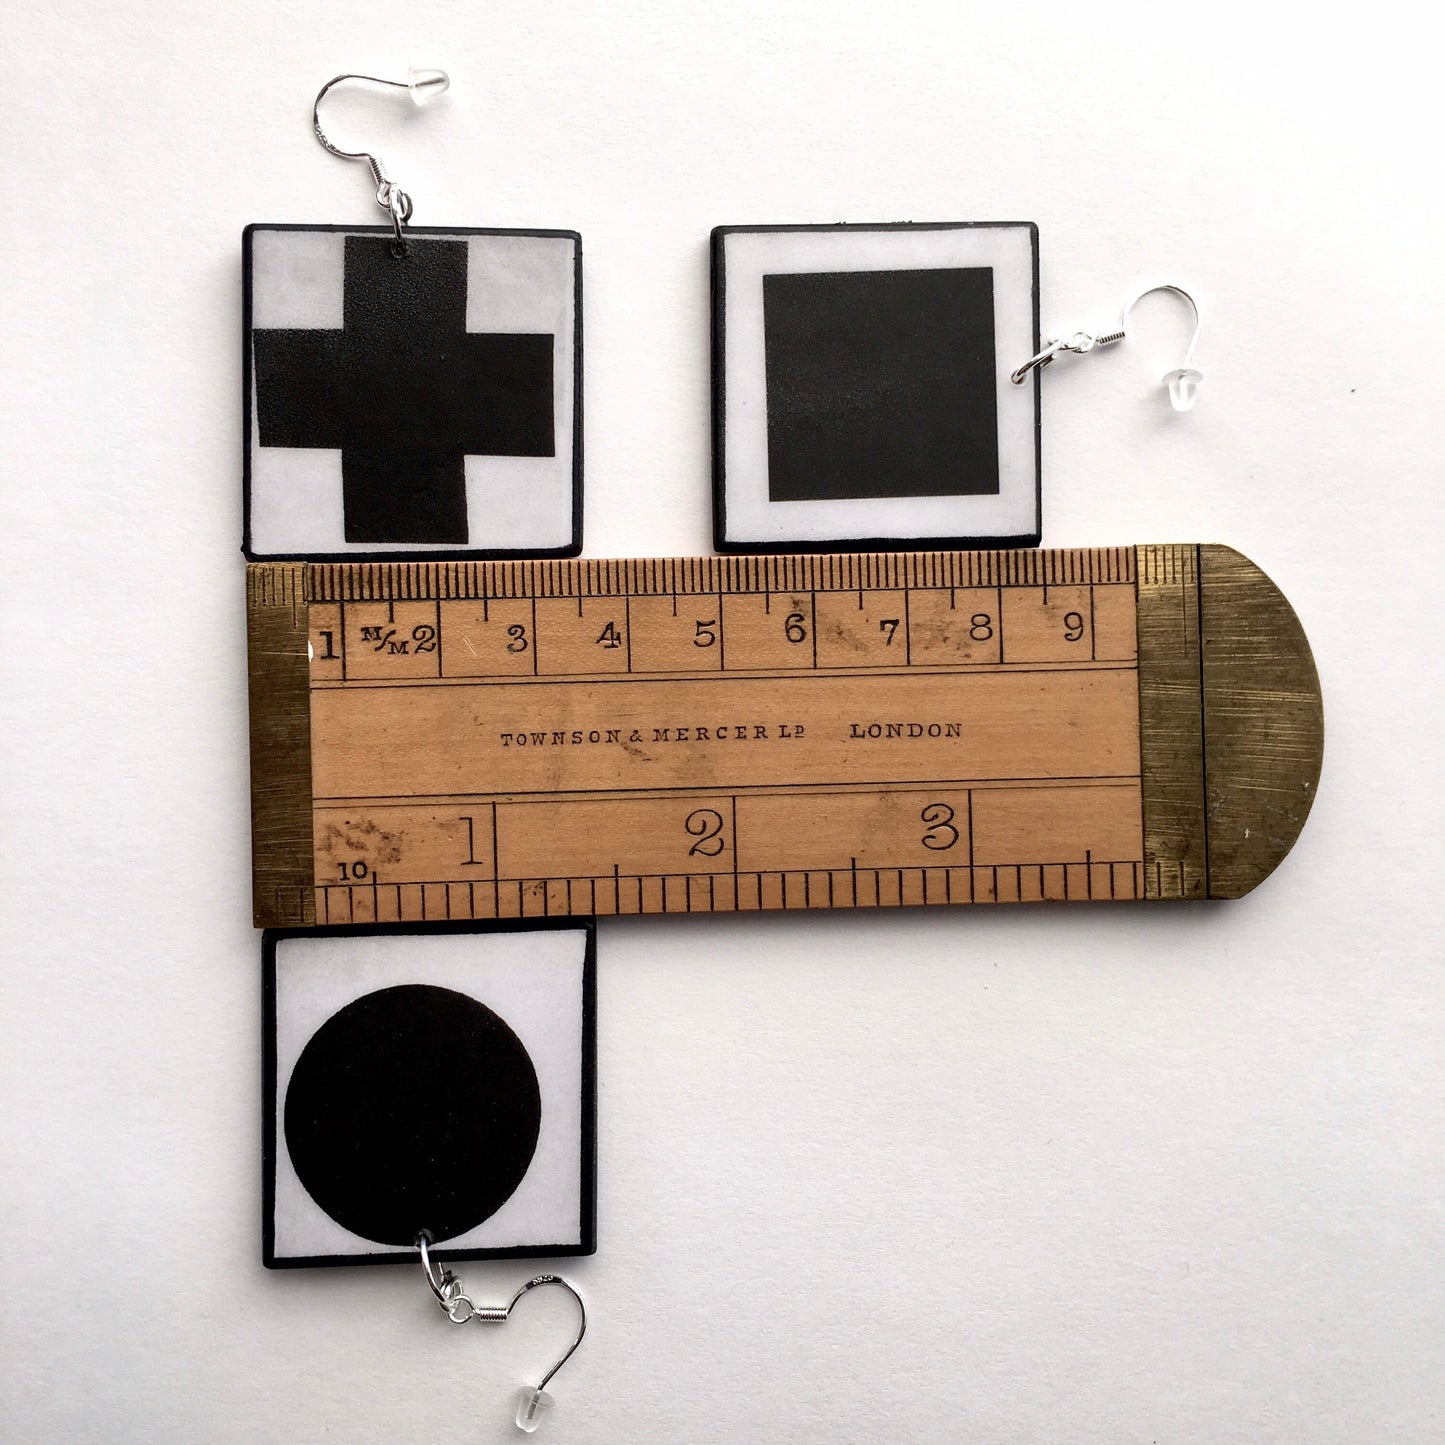 Geometric, abstract, statement art earrings inspired Obljewellery by Kazimir Malevich and his paintings in Suprematism style. Black Cross, Black Circle and Black Square